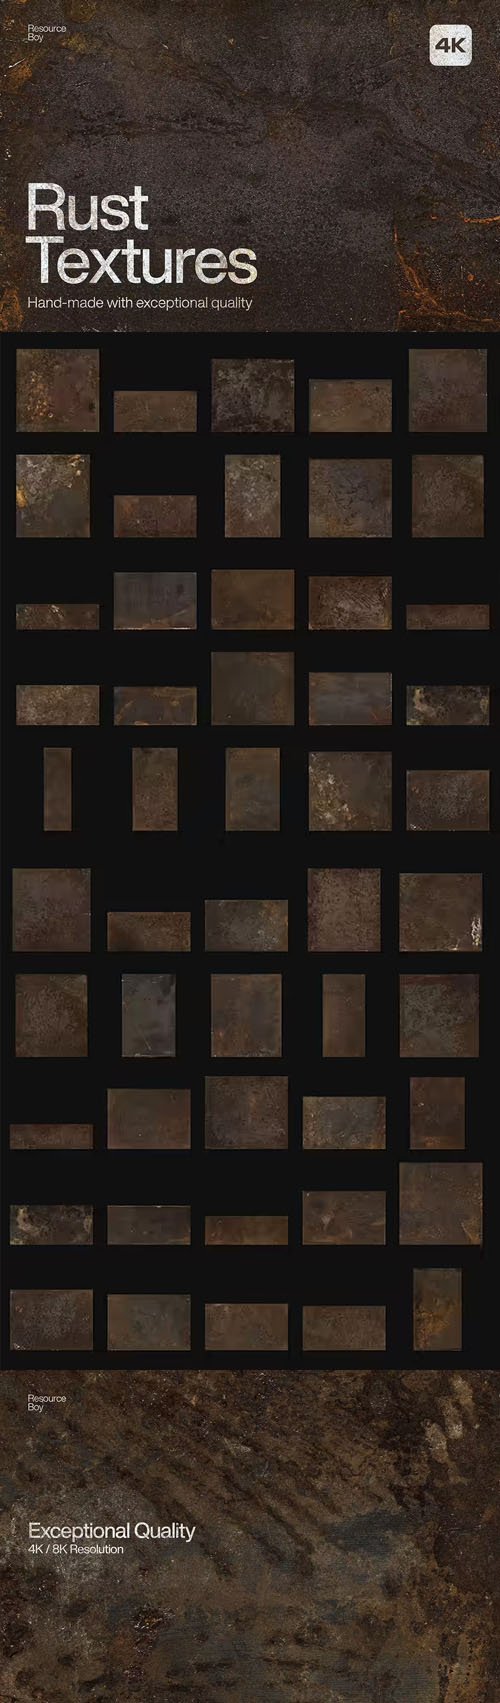 50 Rust Textures - Handmade With Exceptional Quality